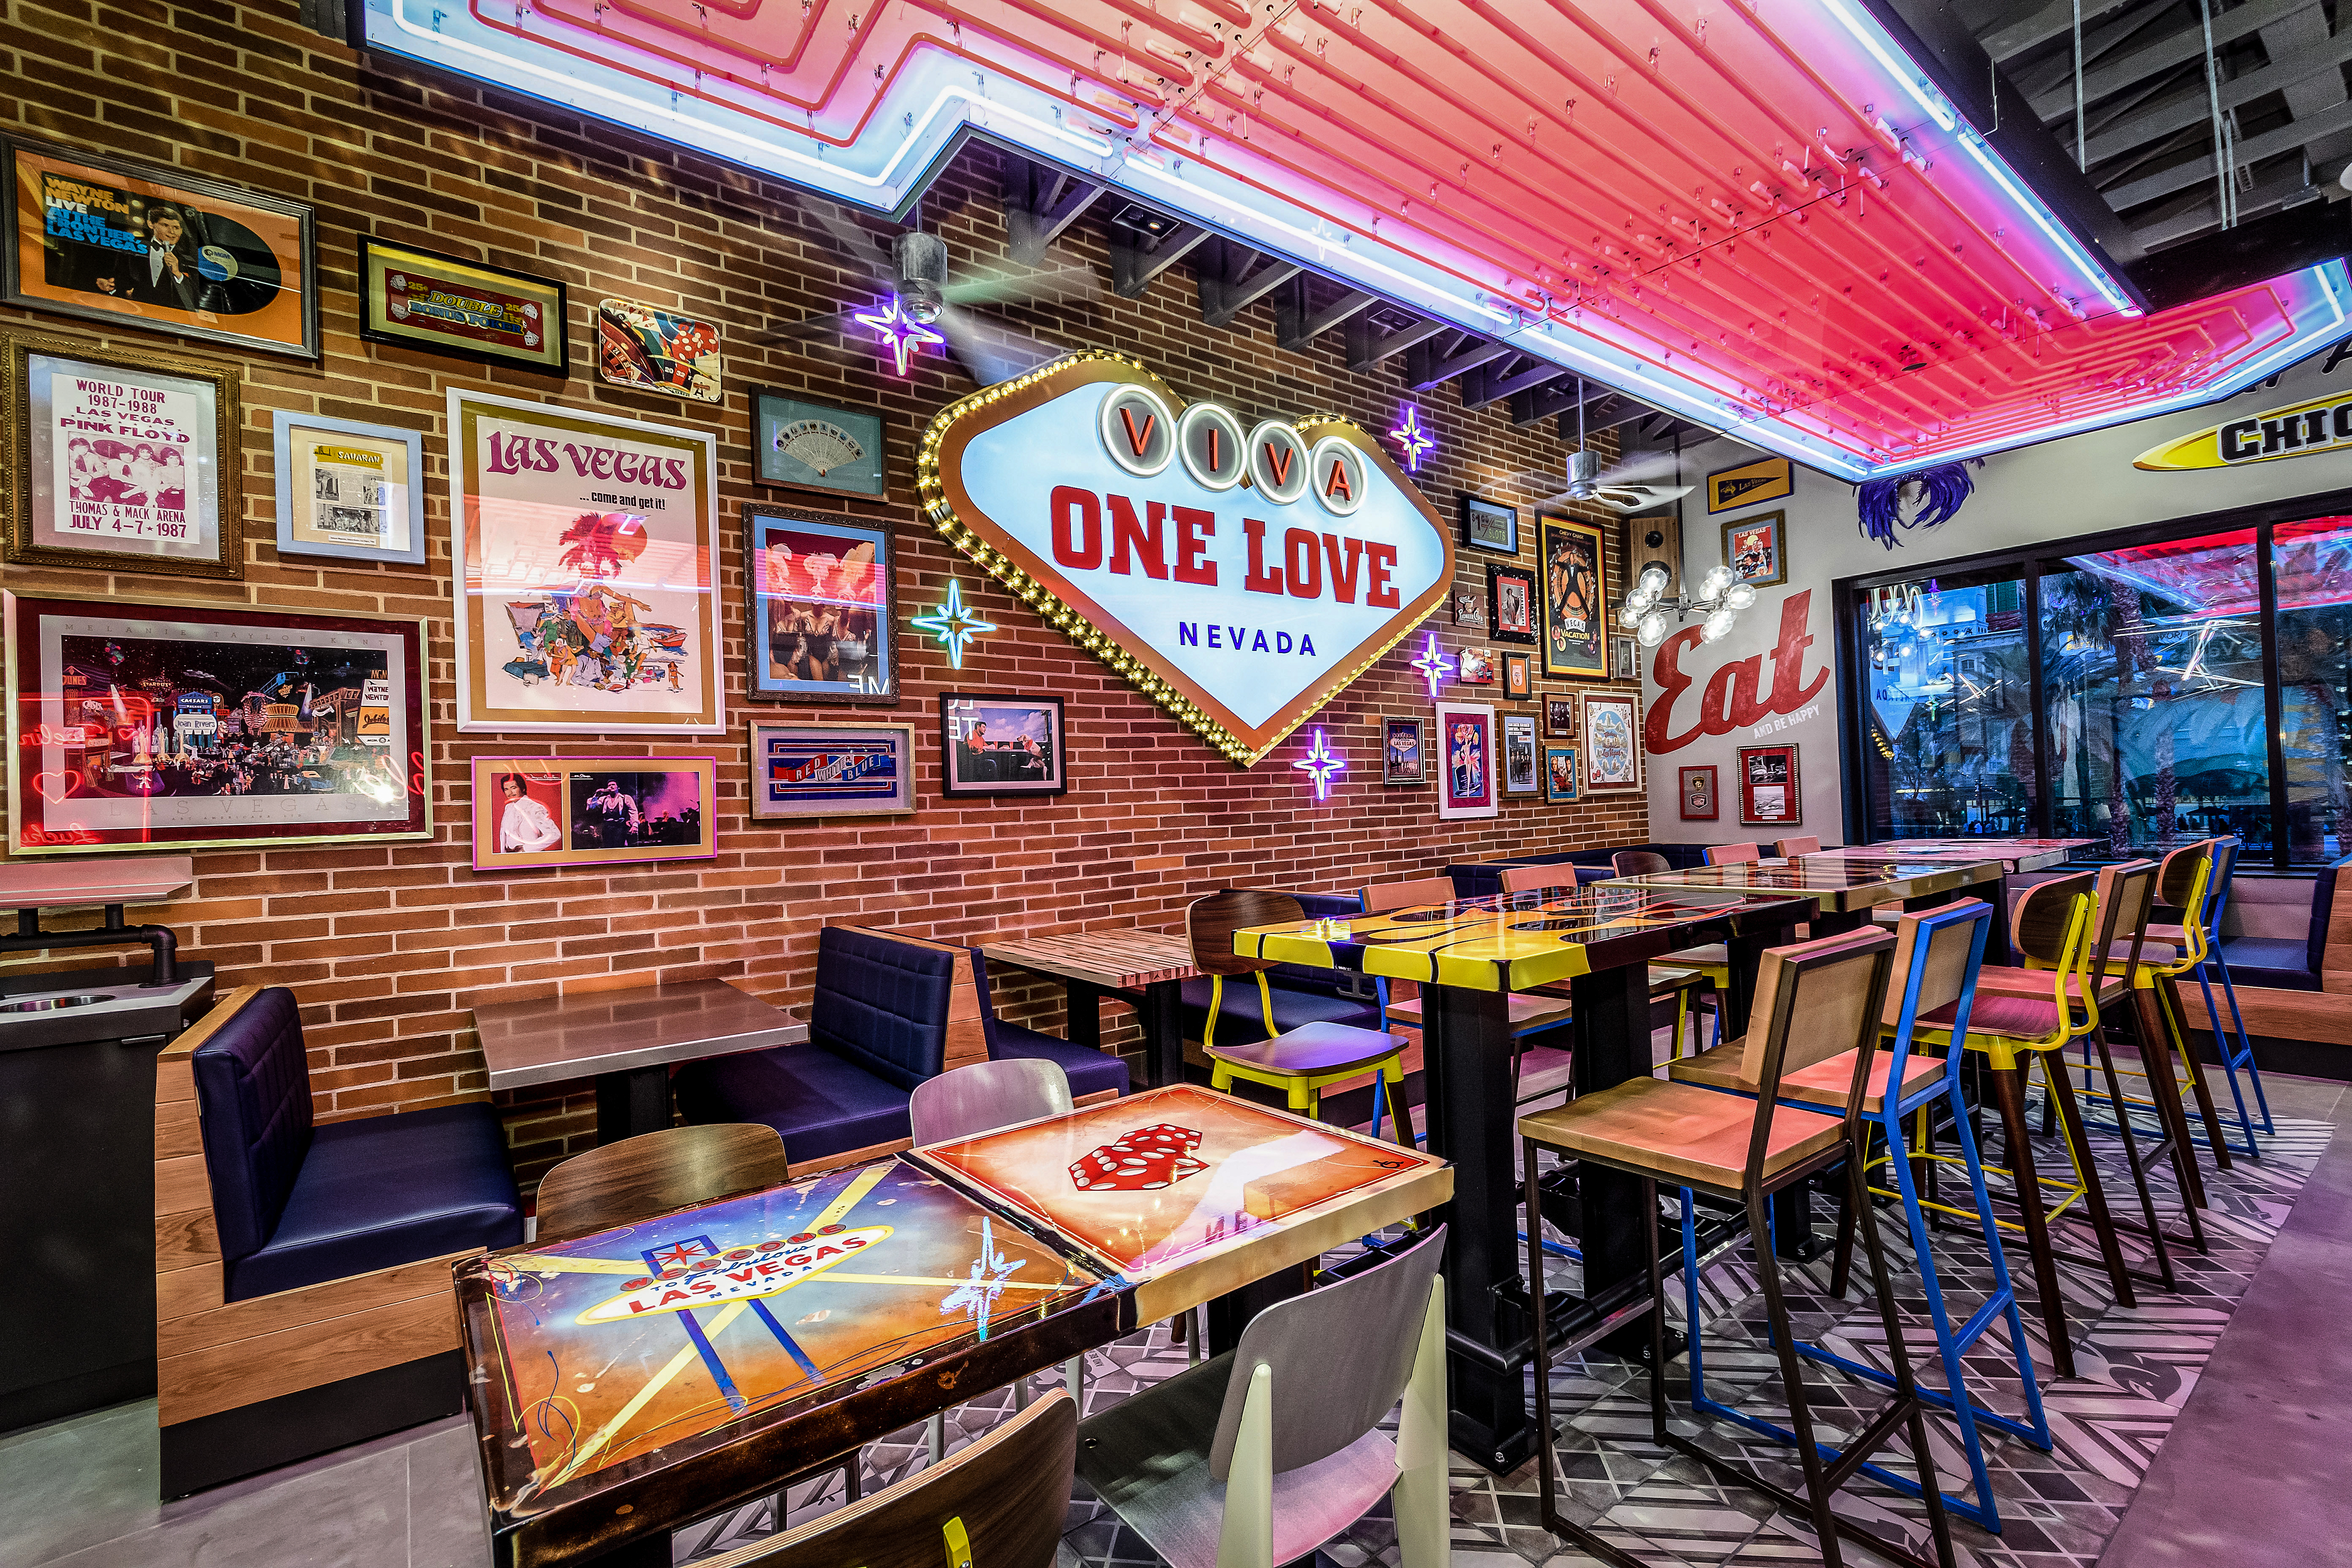 Raising Cane’s location the Las Vegas Strip with neon lights on the ceiling